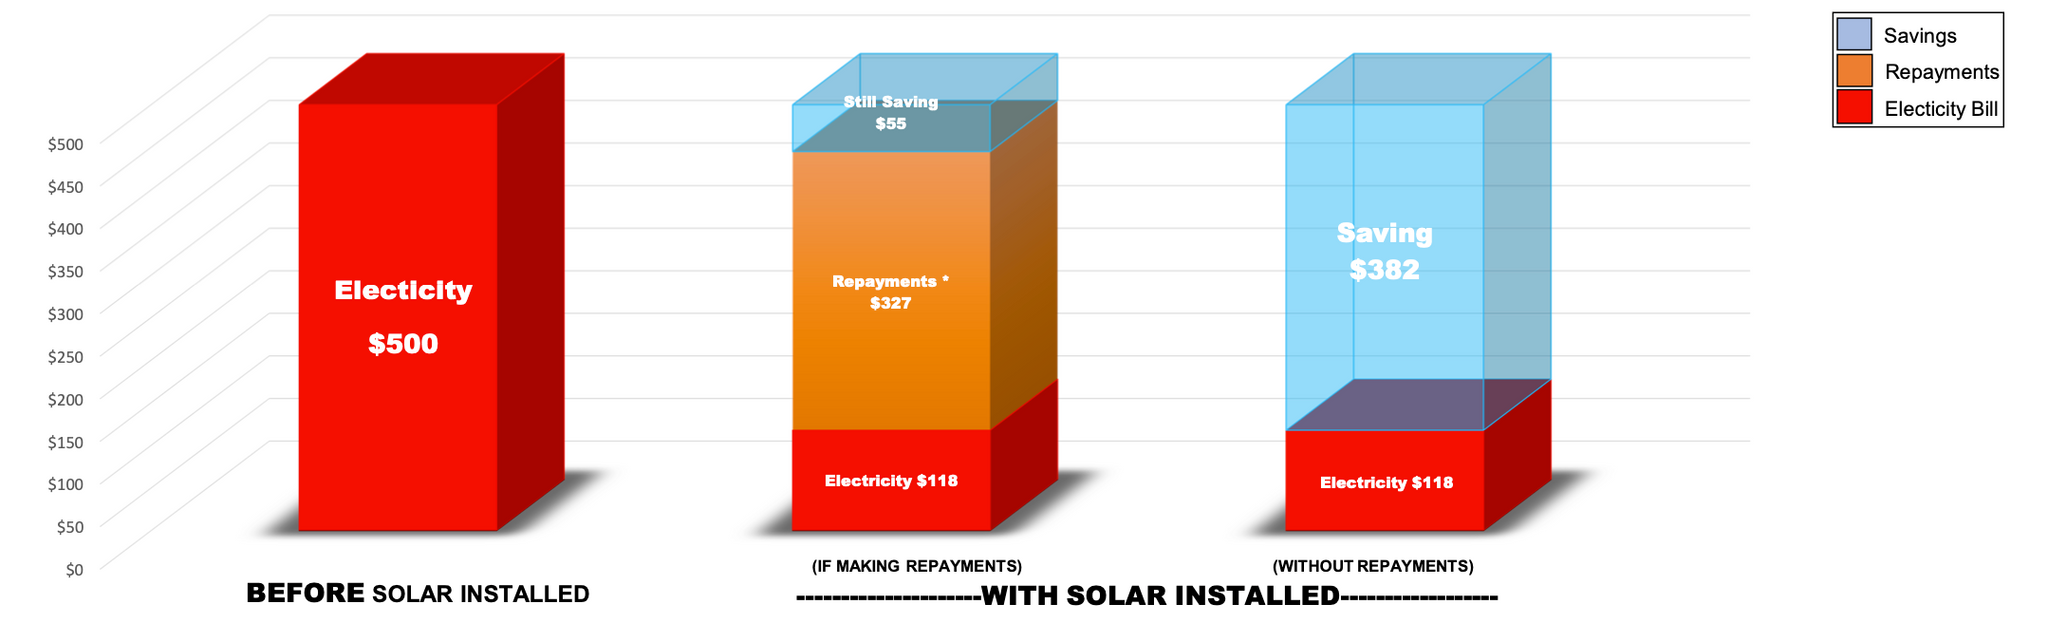 The image explains how much customers saves on electricity before installing solar panels and after installing solar panels